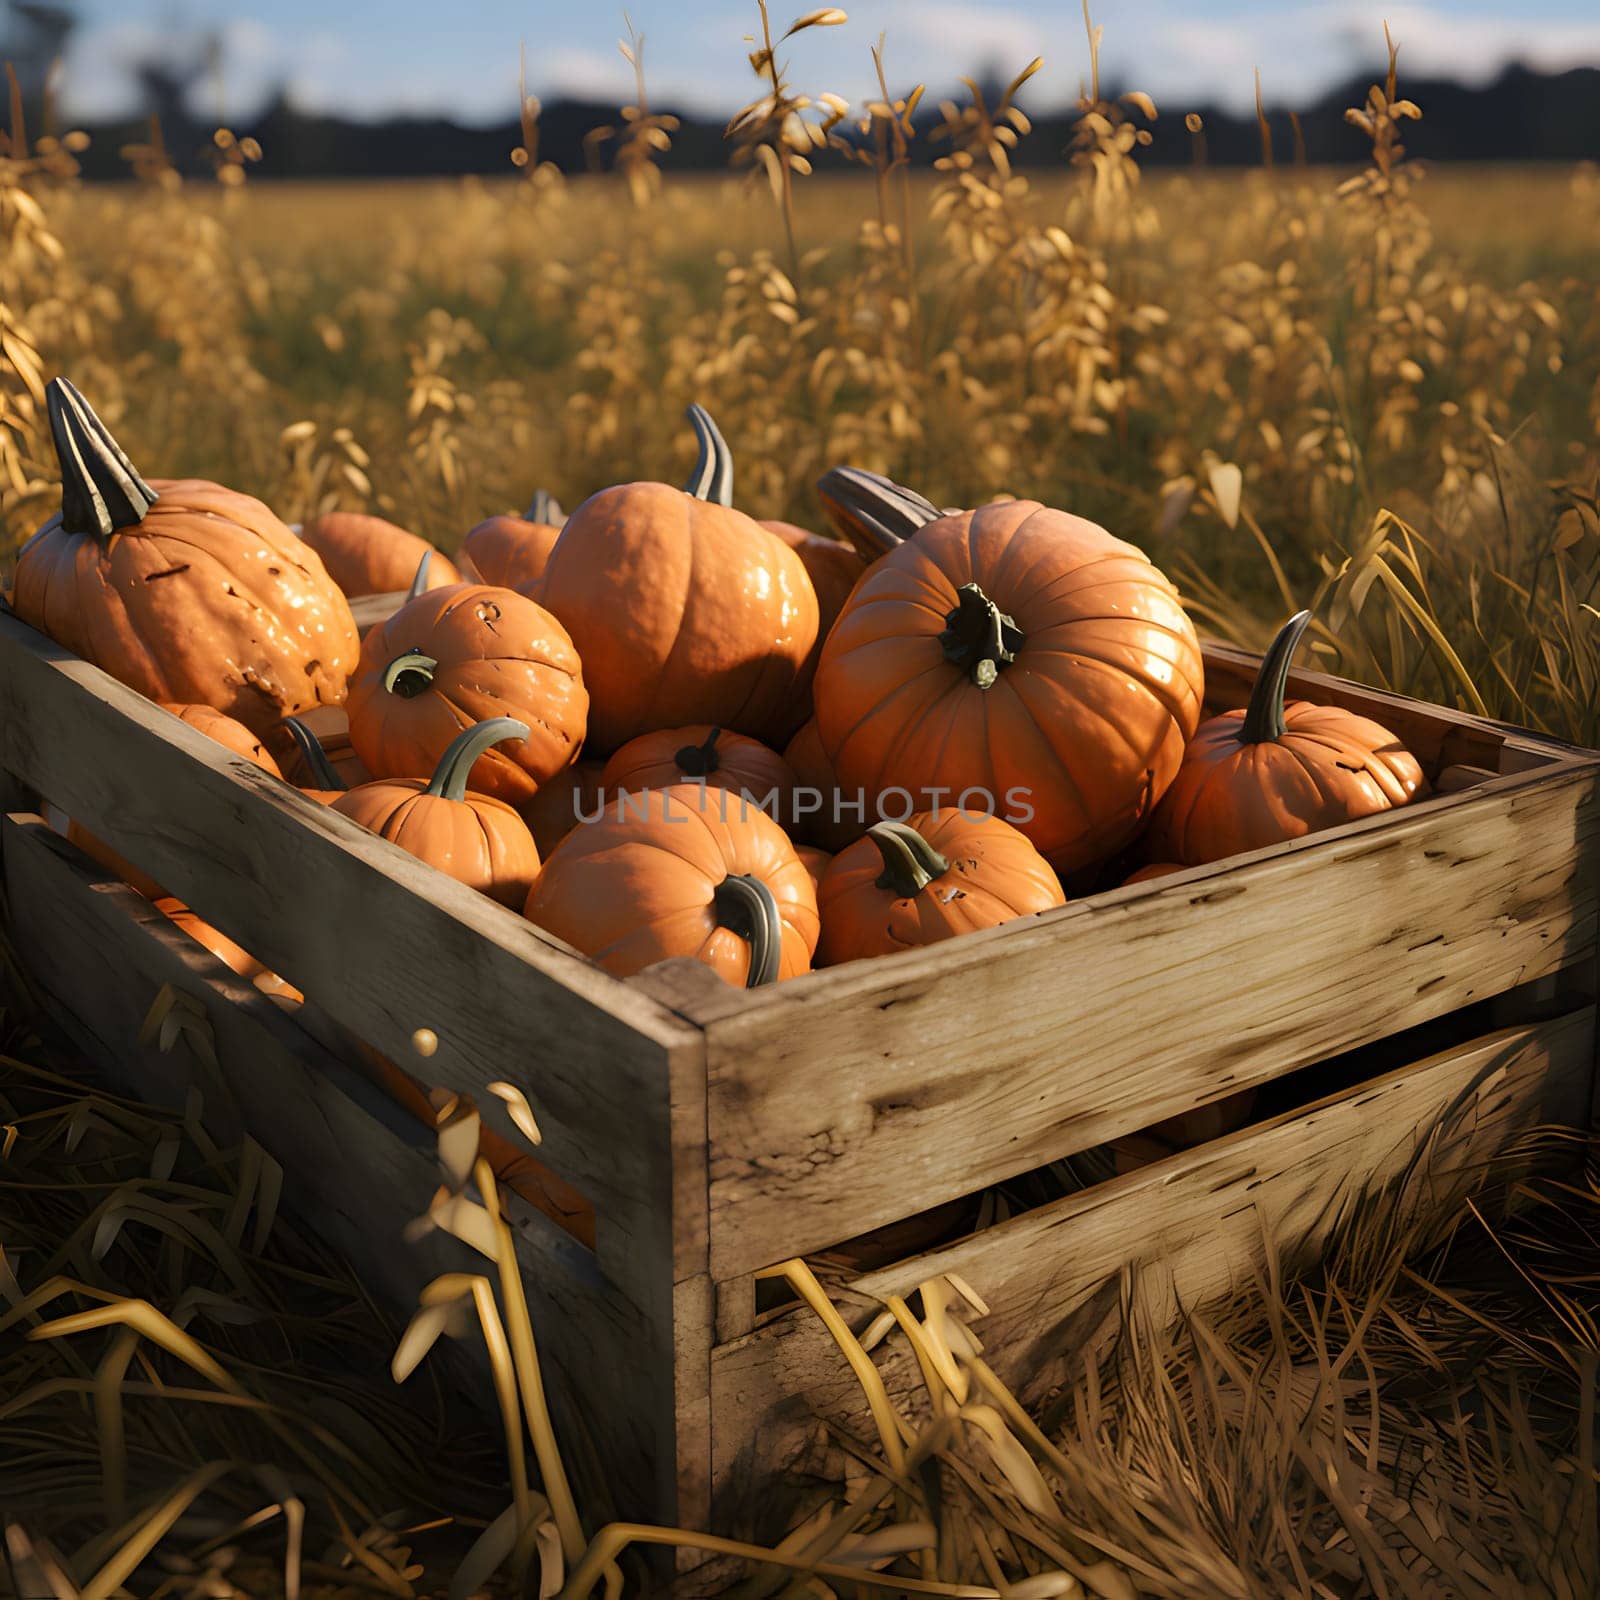 Small orange pumpkins in a wooden box in a field. Pumpkin as a dish of thanksgiving for the harvest. by ThemesS